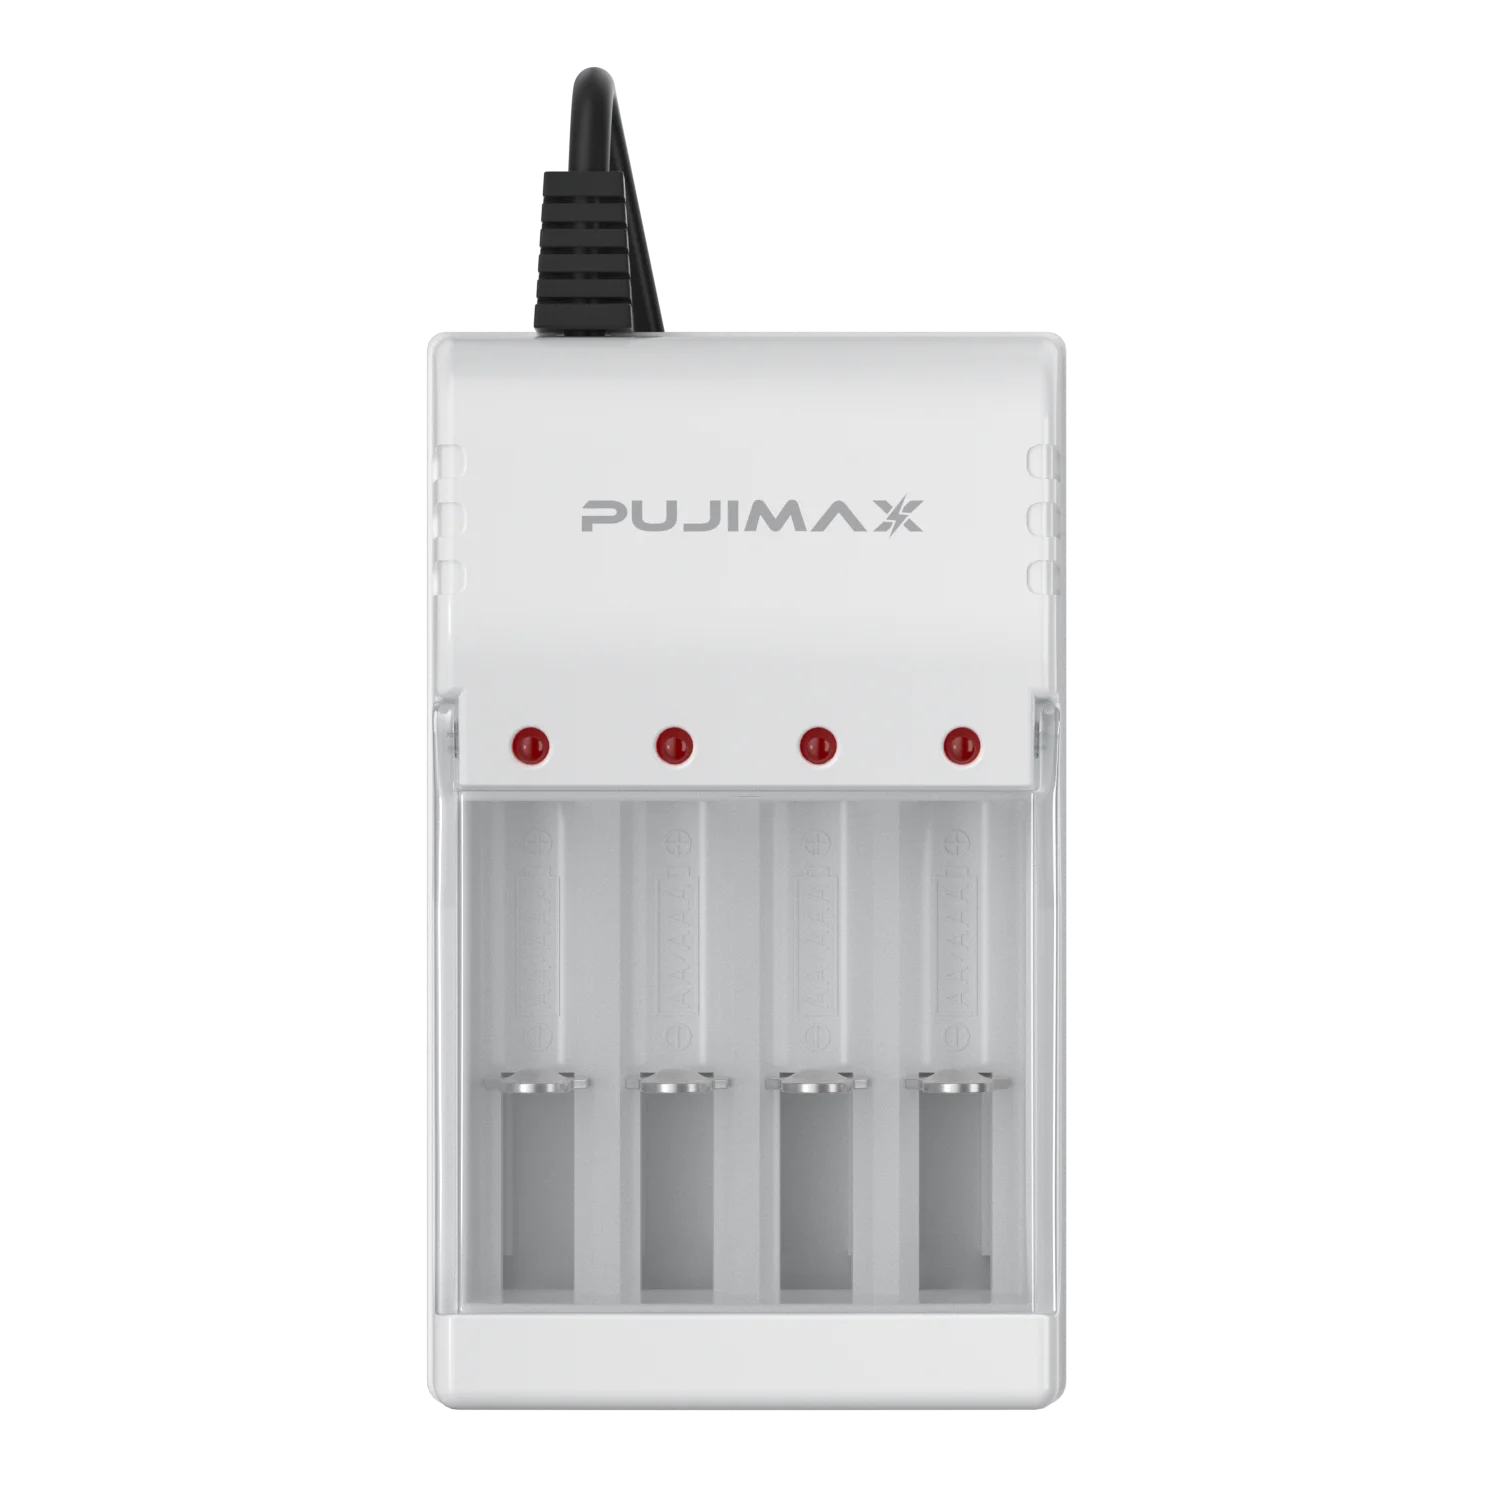 

PUJIMAX Universal 4 Bank Battery Charger Adapter EU Plug Fast Charging AAA AA Ni-MH/Ni-Cd Rechargeable Battery Accessories, White